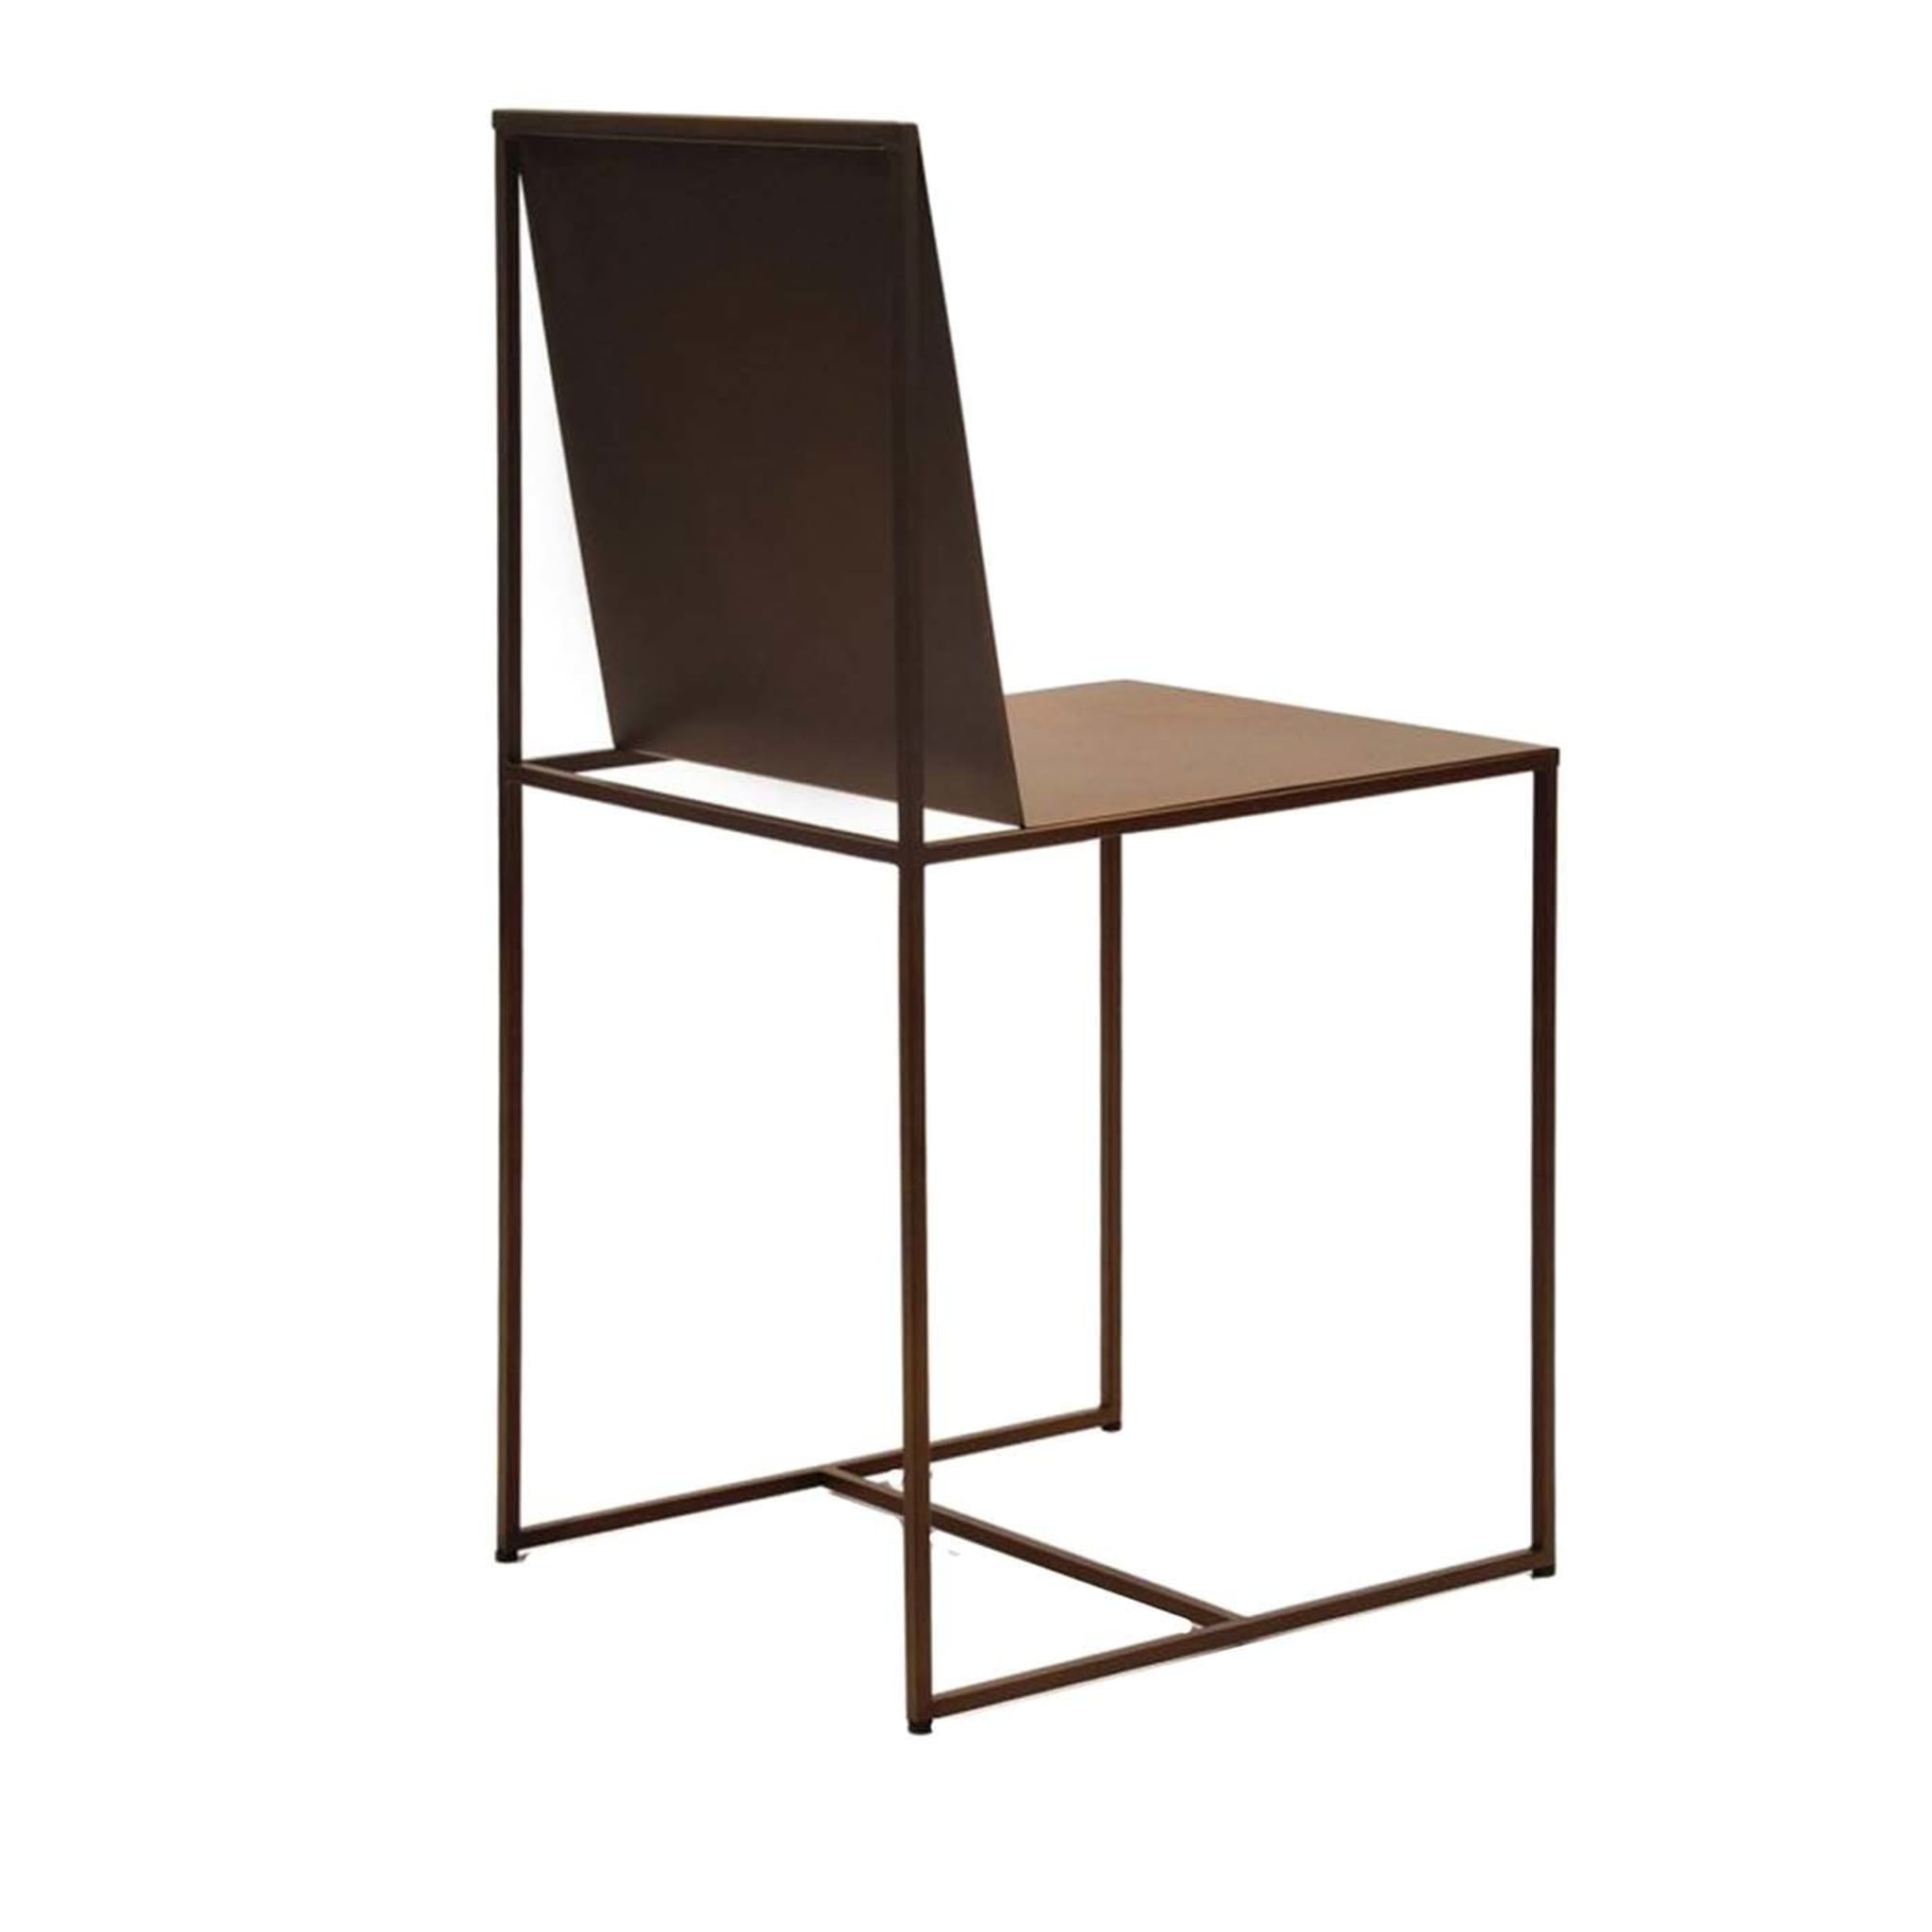 Slim Sissi Set of 2 Chairs by Maurizio Peregalli - Main view